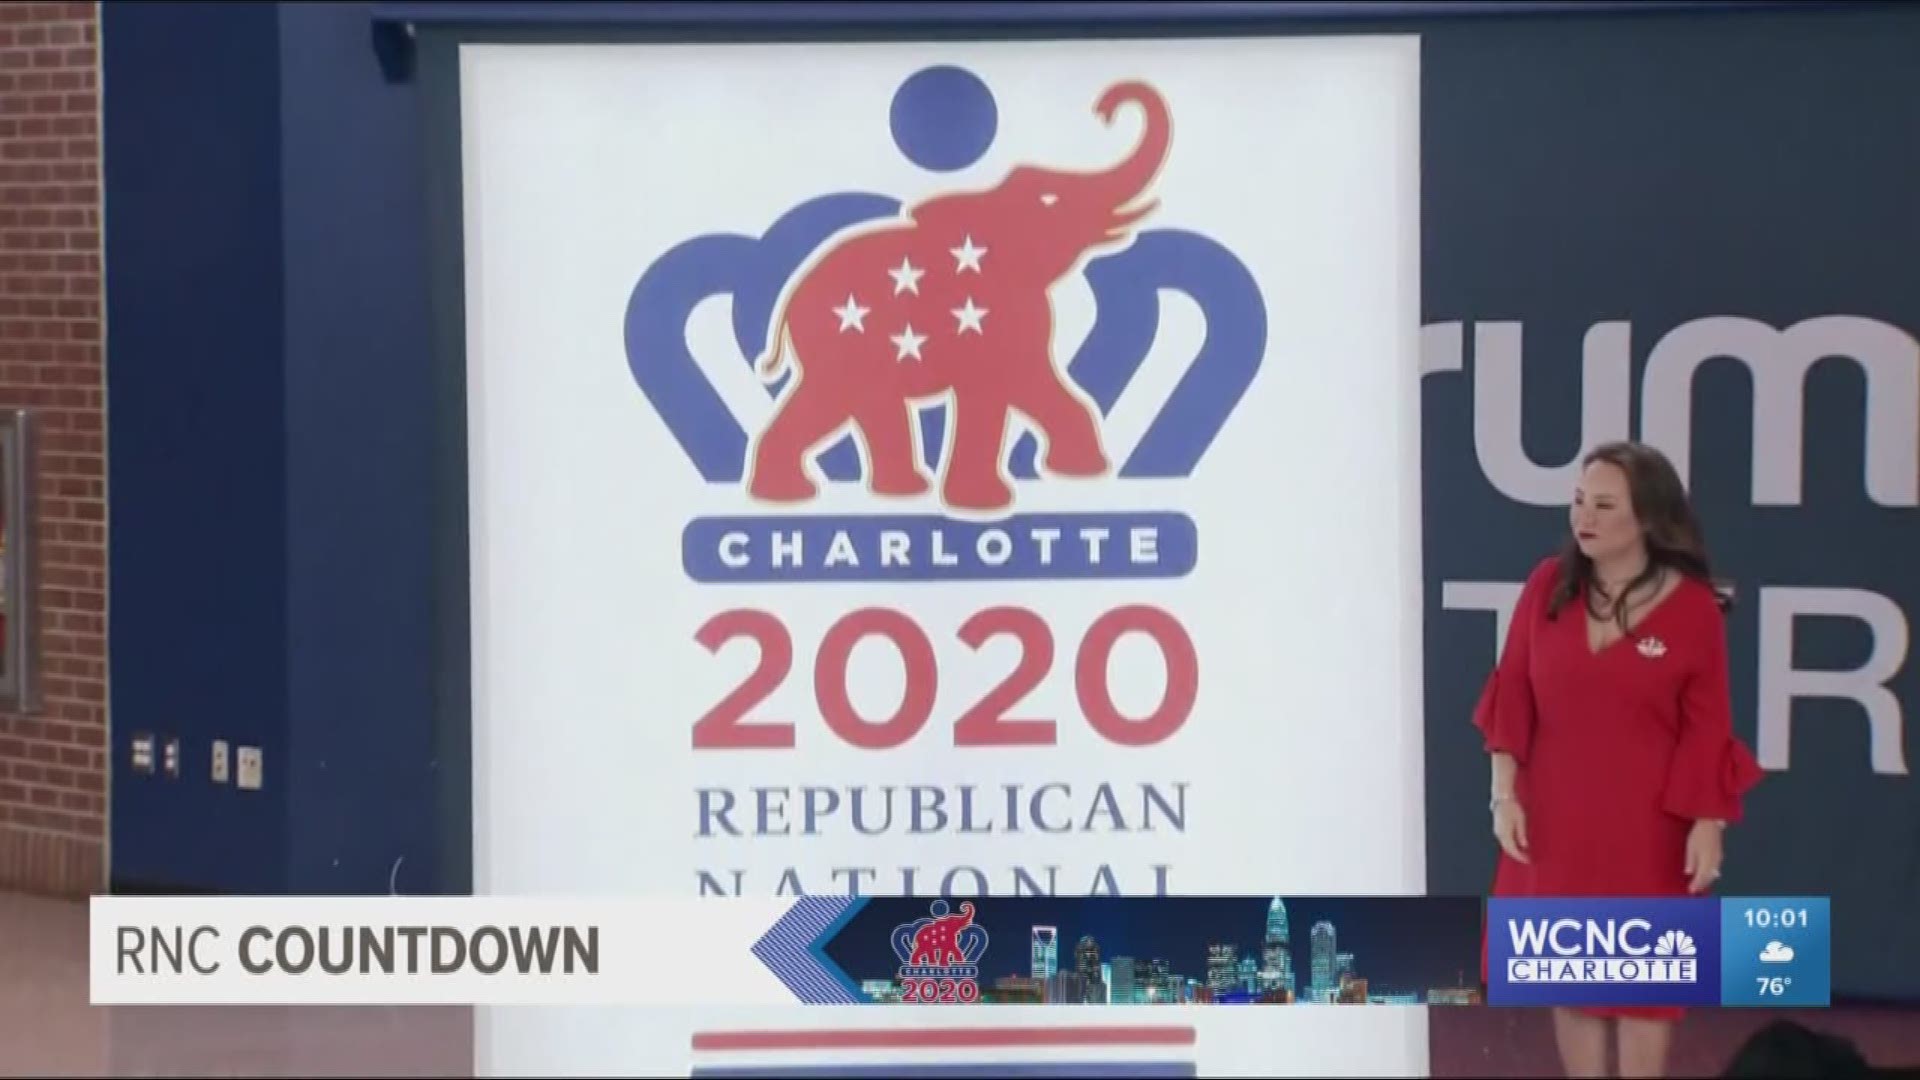 The 2020 Republican National Convention will be held next August, and officials believe it will have a lucrative financial impact on the Charlotte area.